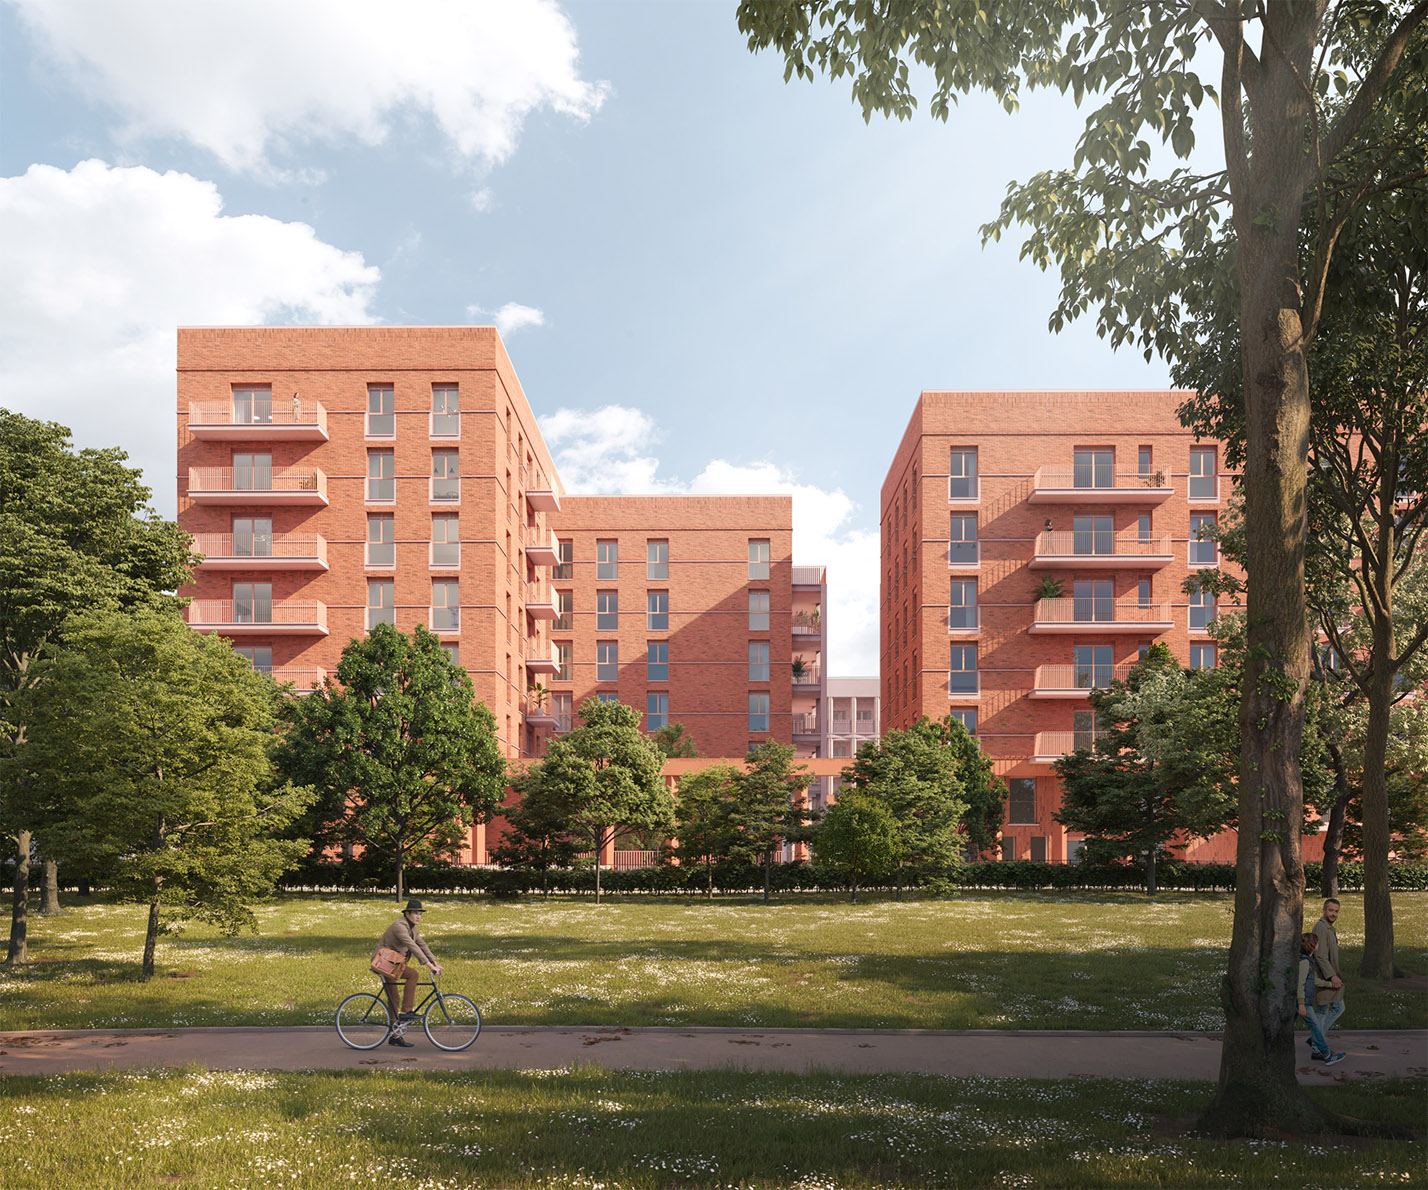 Phase 2 of Westbury Estate regeneration given the green light by Lambeth Council